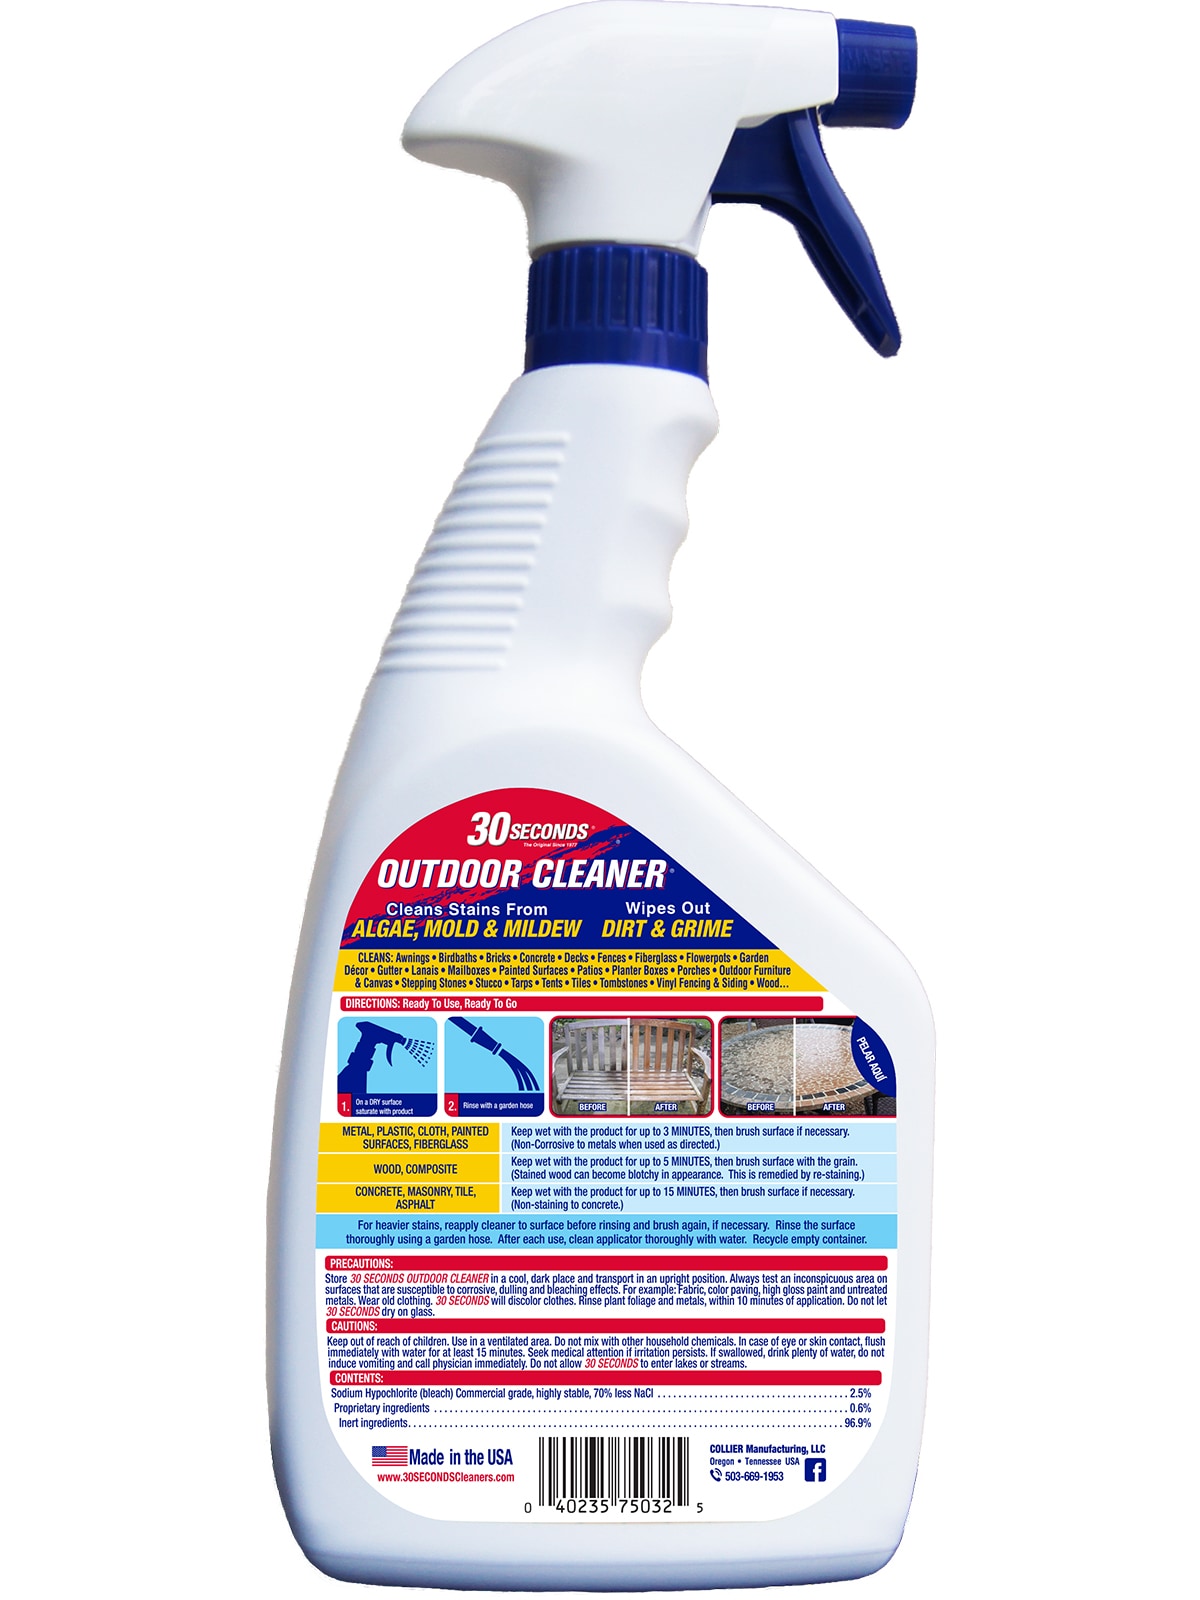 30 SECONDS 32-fl oz Mold and Mildew Stain Remover Outdoor Cleaner